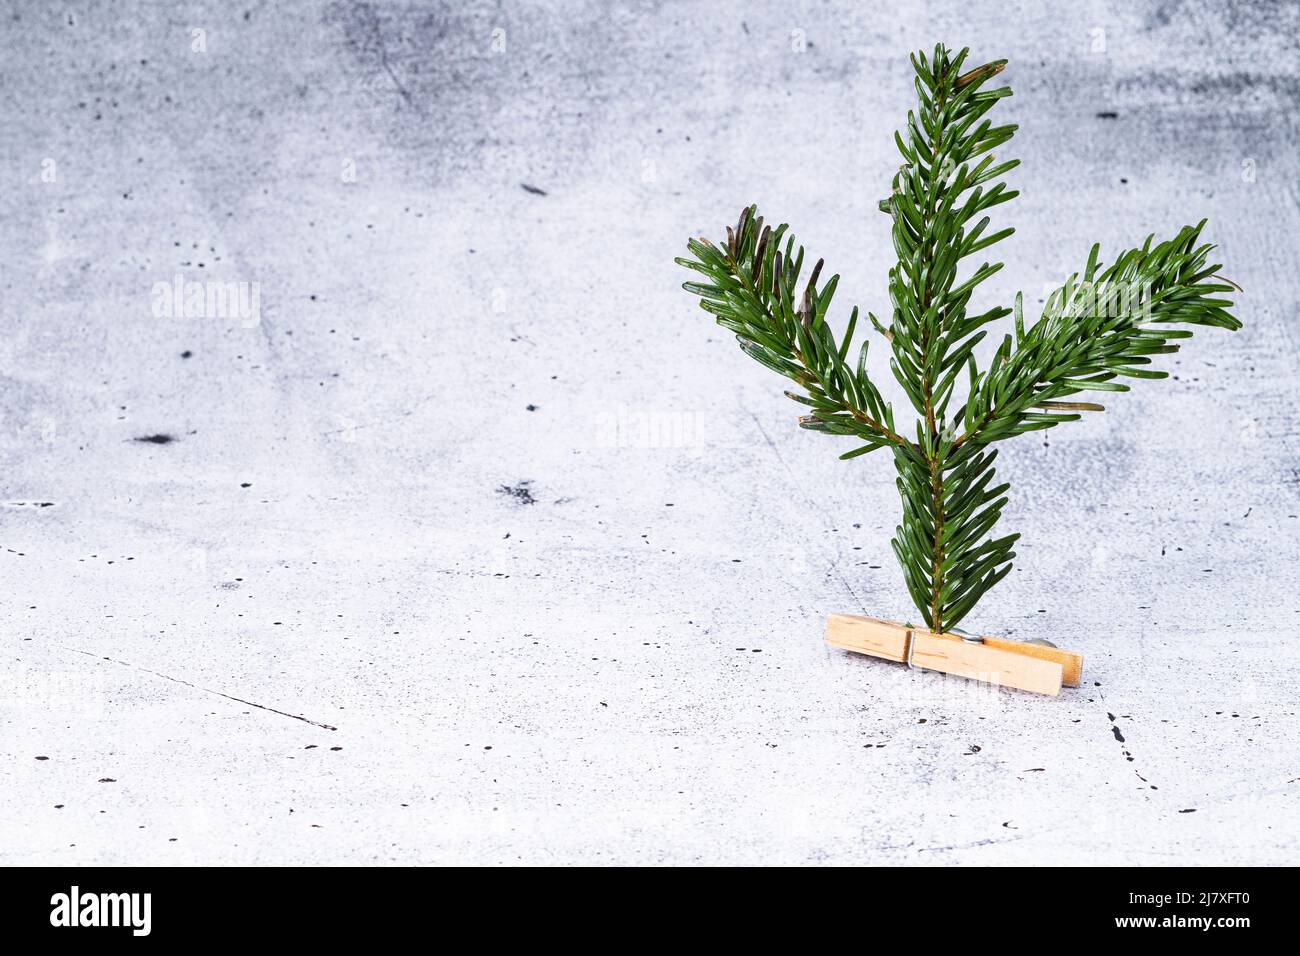 The photo shows a fir tree branch with wooden clamp on concrete background Stock Photo